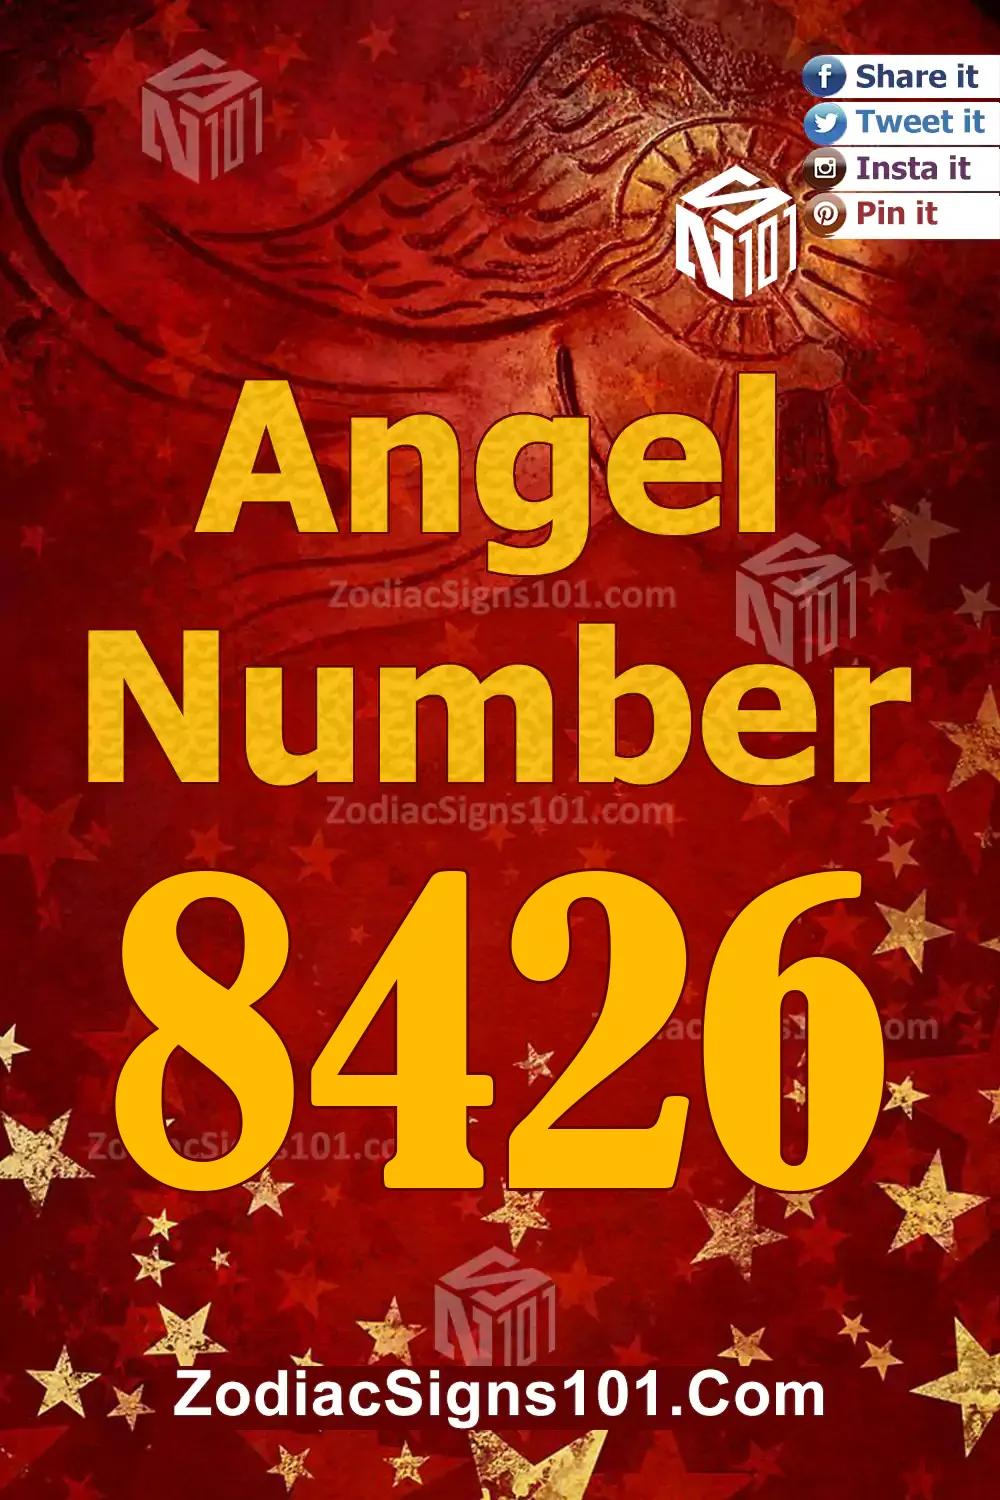 8426 Angel Number Meaning